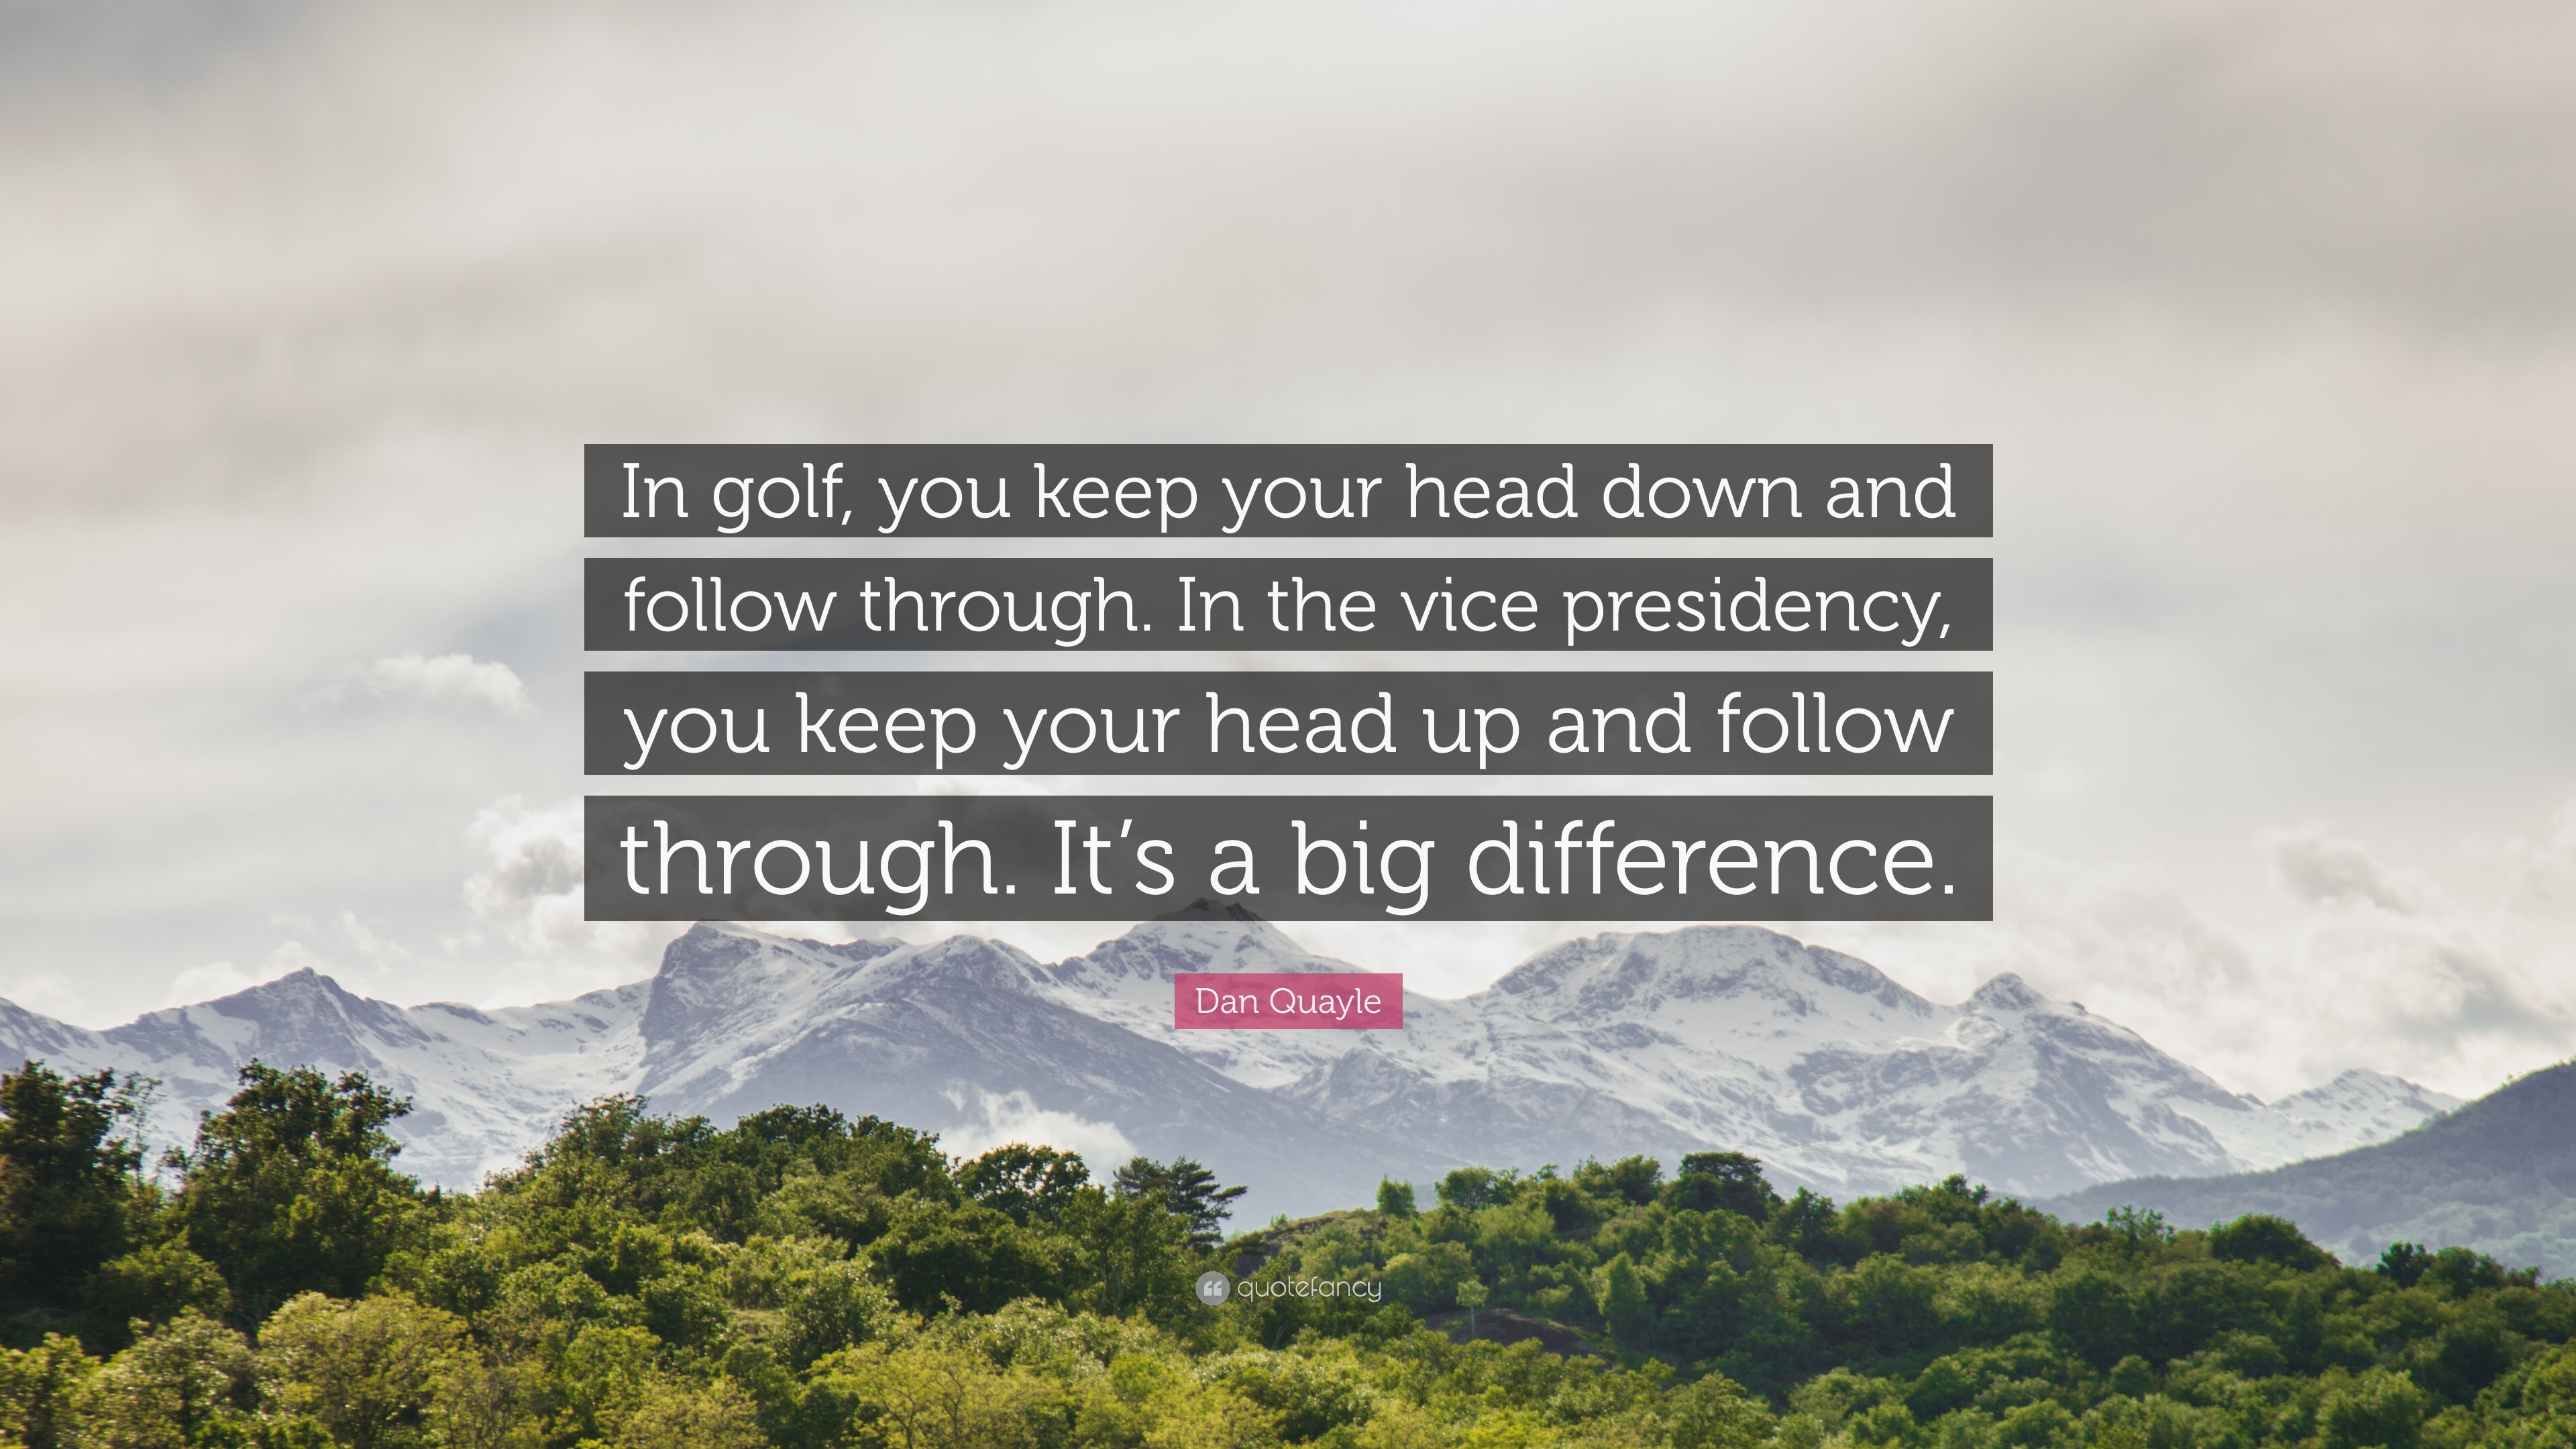 Dan Quayle Quote: “In golf, you keep your head down and follow through. In  the vice presidency, you keep your head up and follow through. I...”